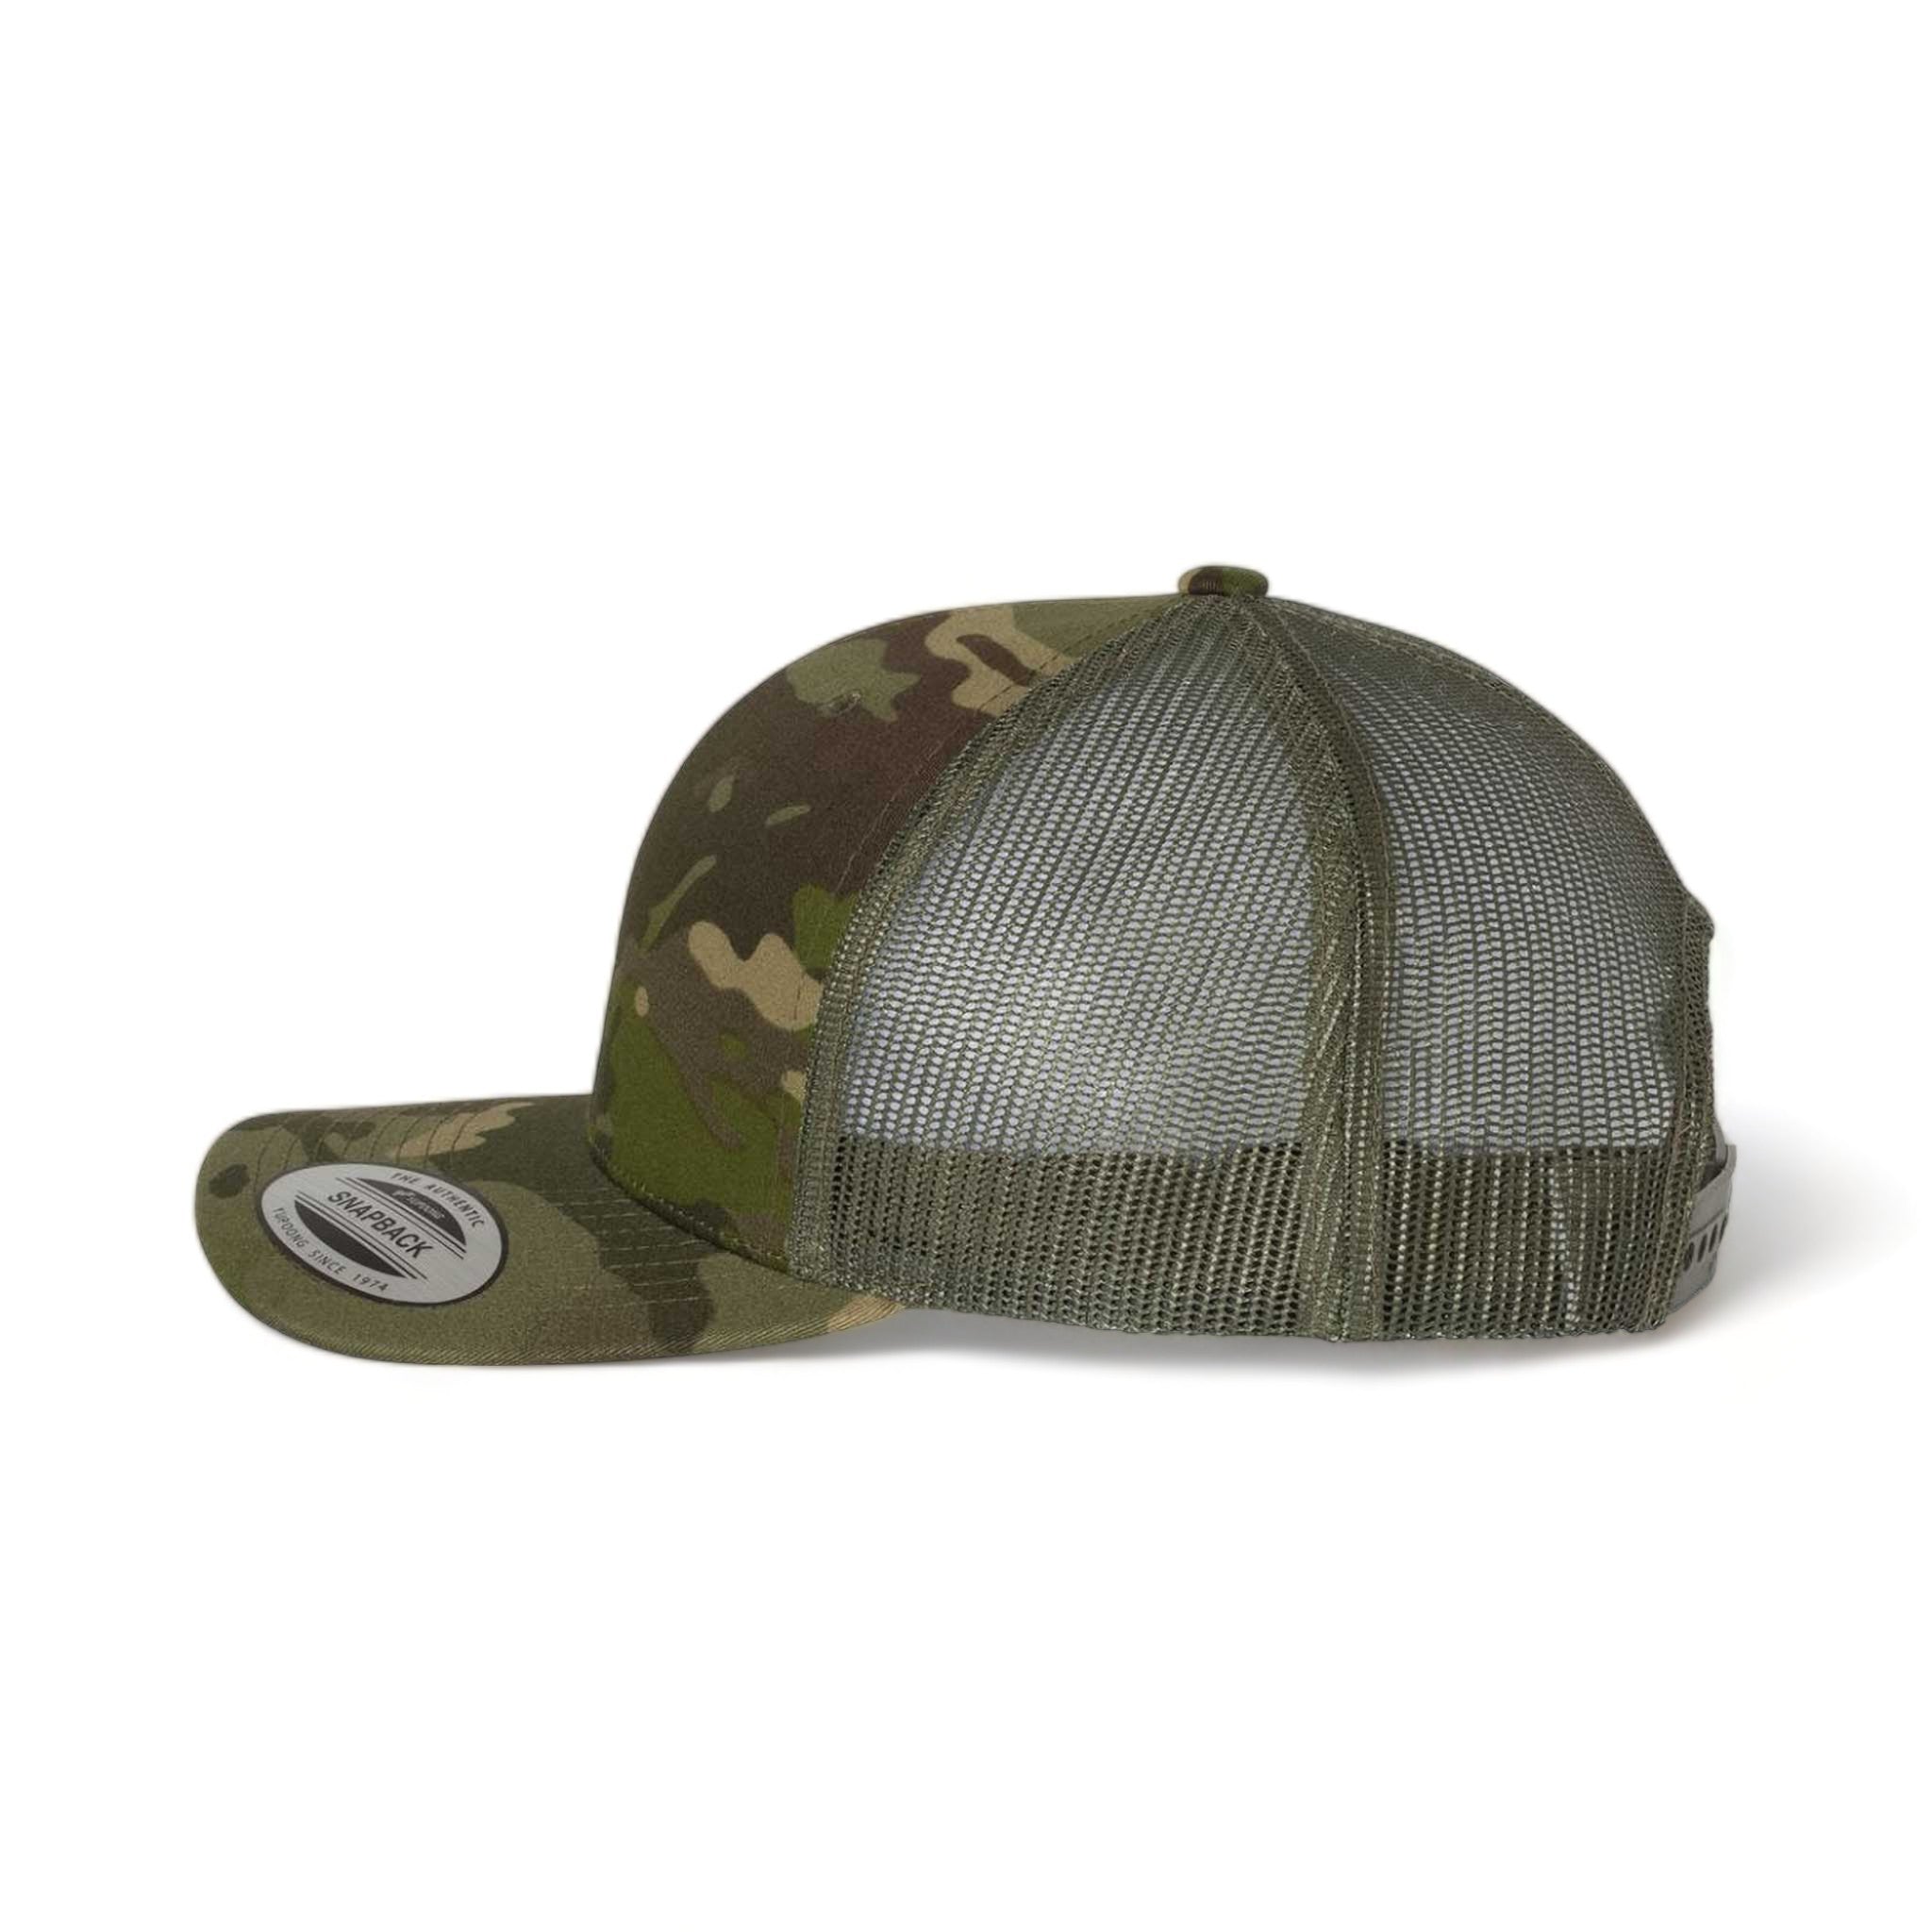 Side view of YP Classics 6606 custom hat in multicam tropic and green